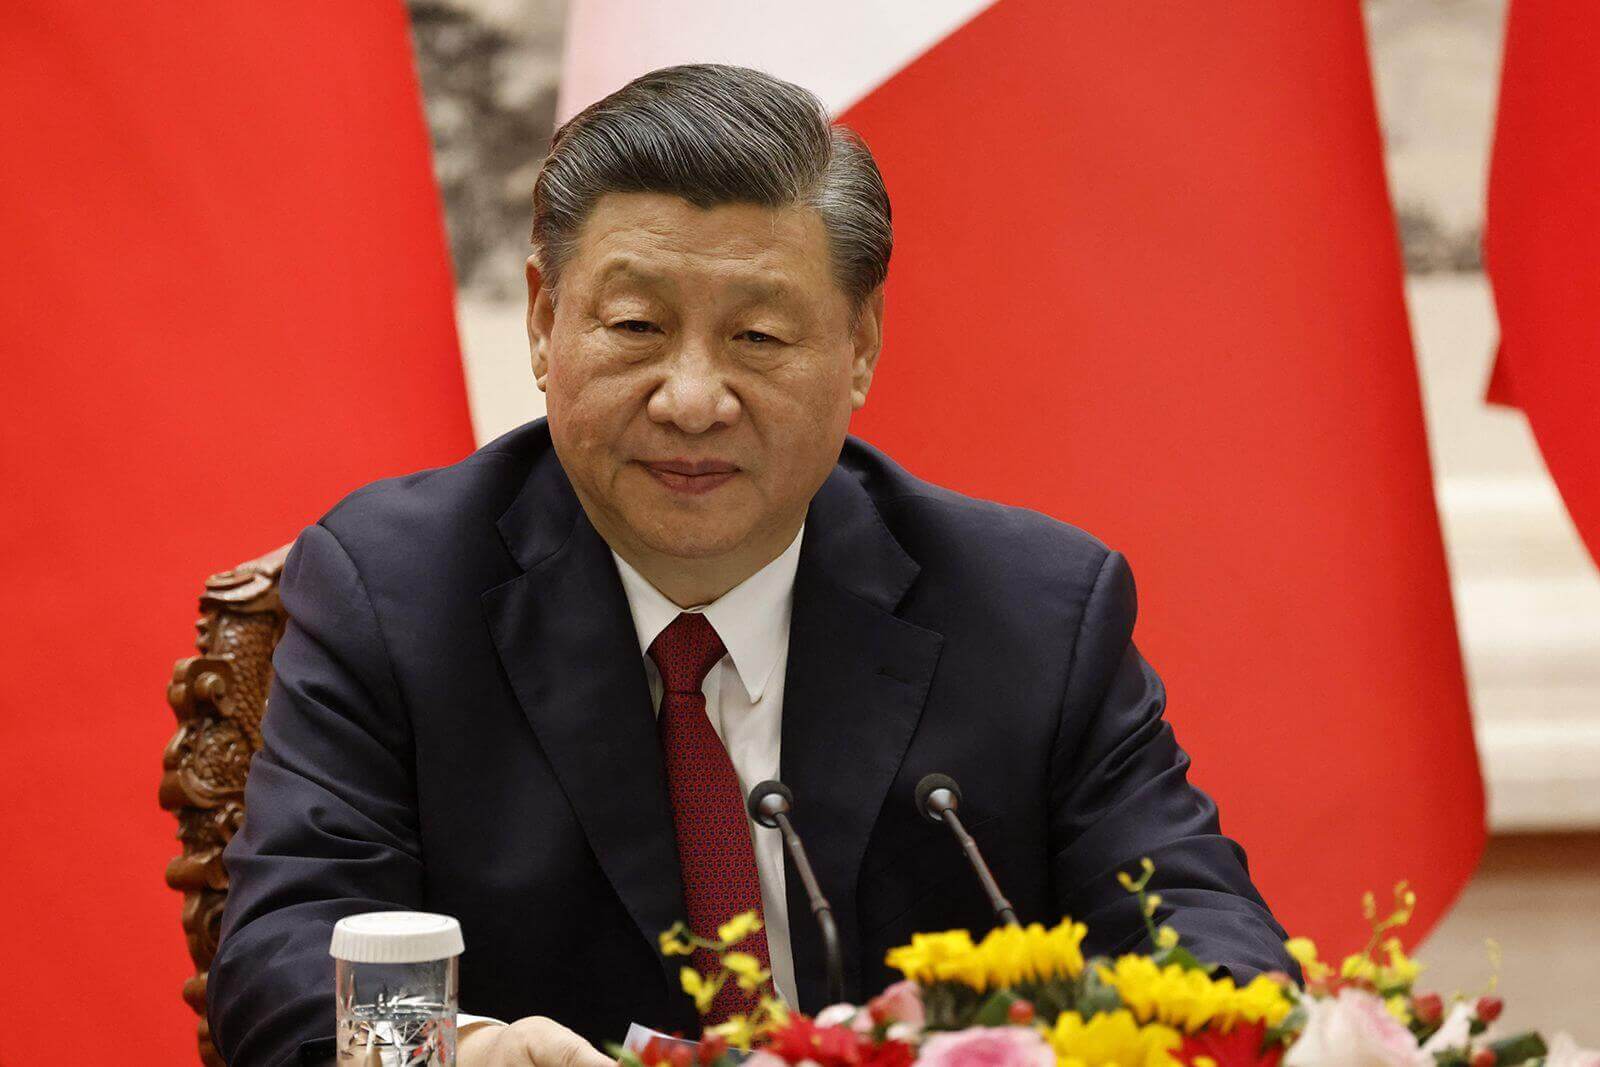 Report Claims Mass Resignations from Chinese Communist Party, Xi Jinping “Fearing” Possible Collapse